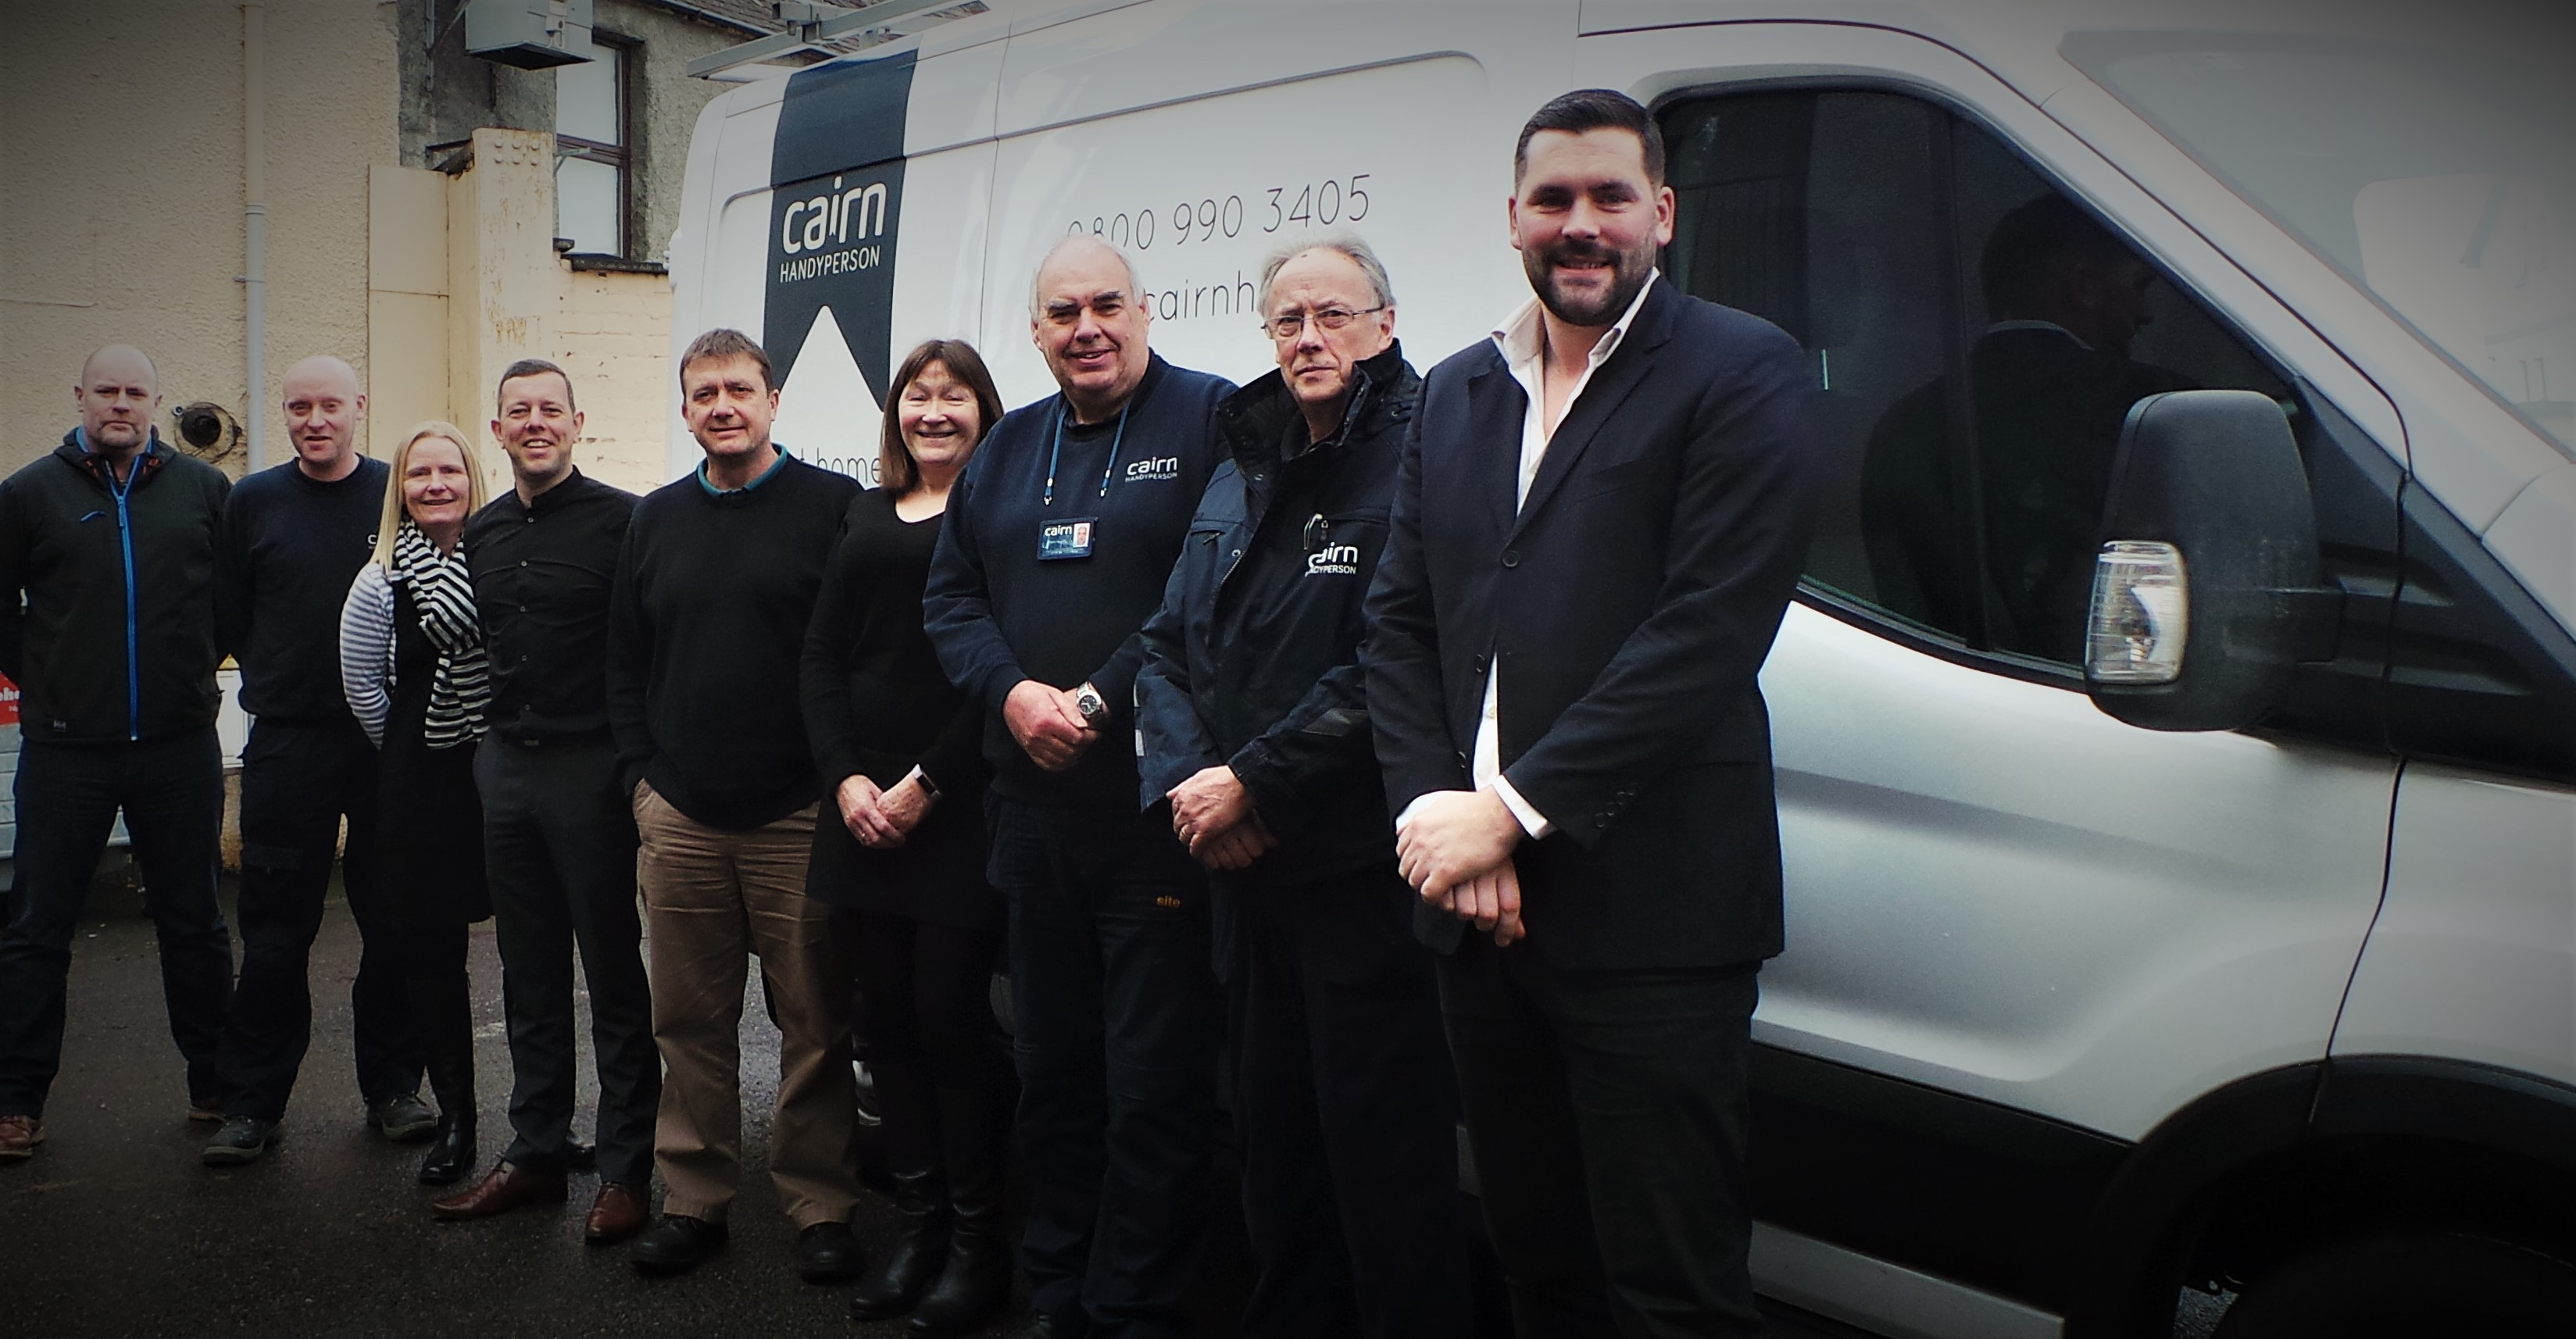 Cairn’s Care & Repair service gains quality recognition